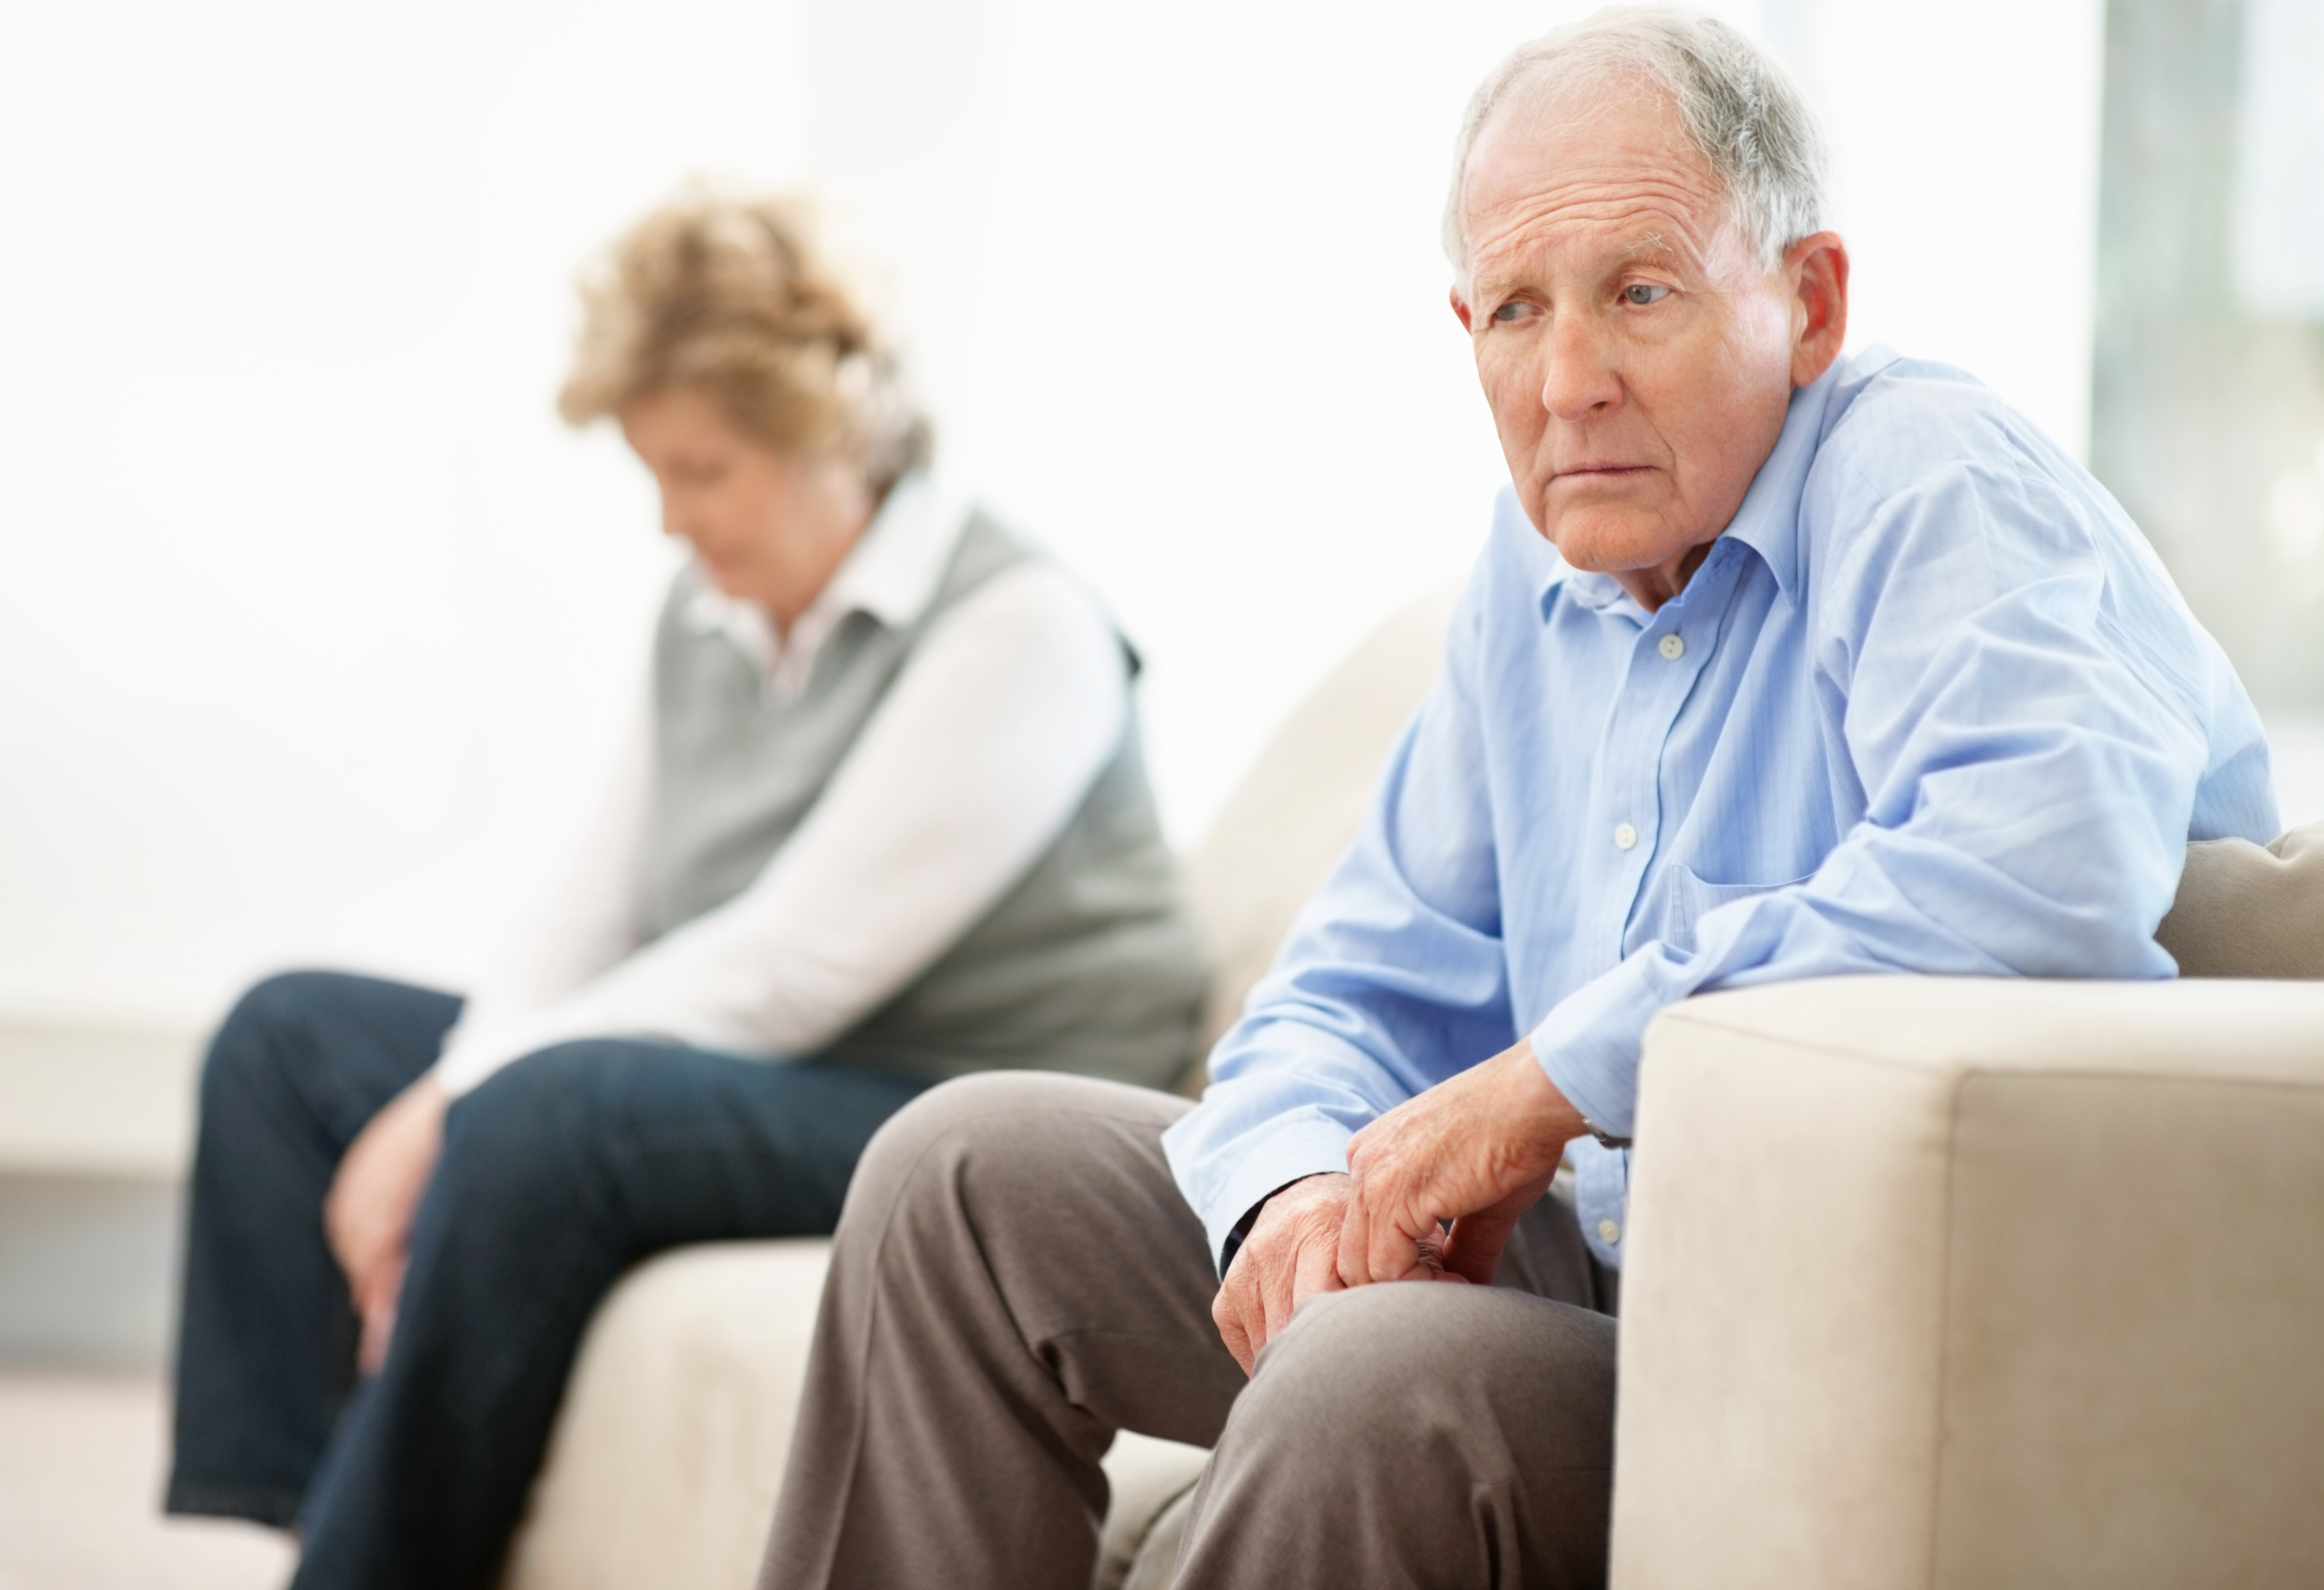 Senior divorce isn’t as uncommon as you think